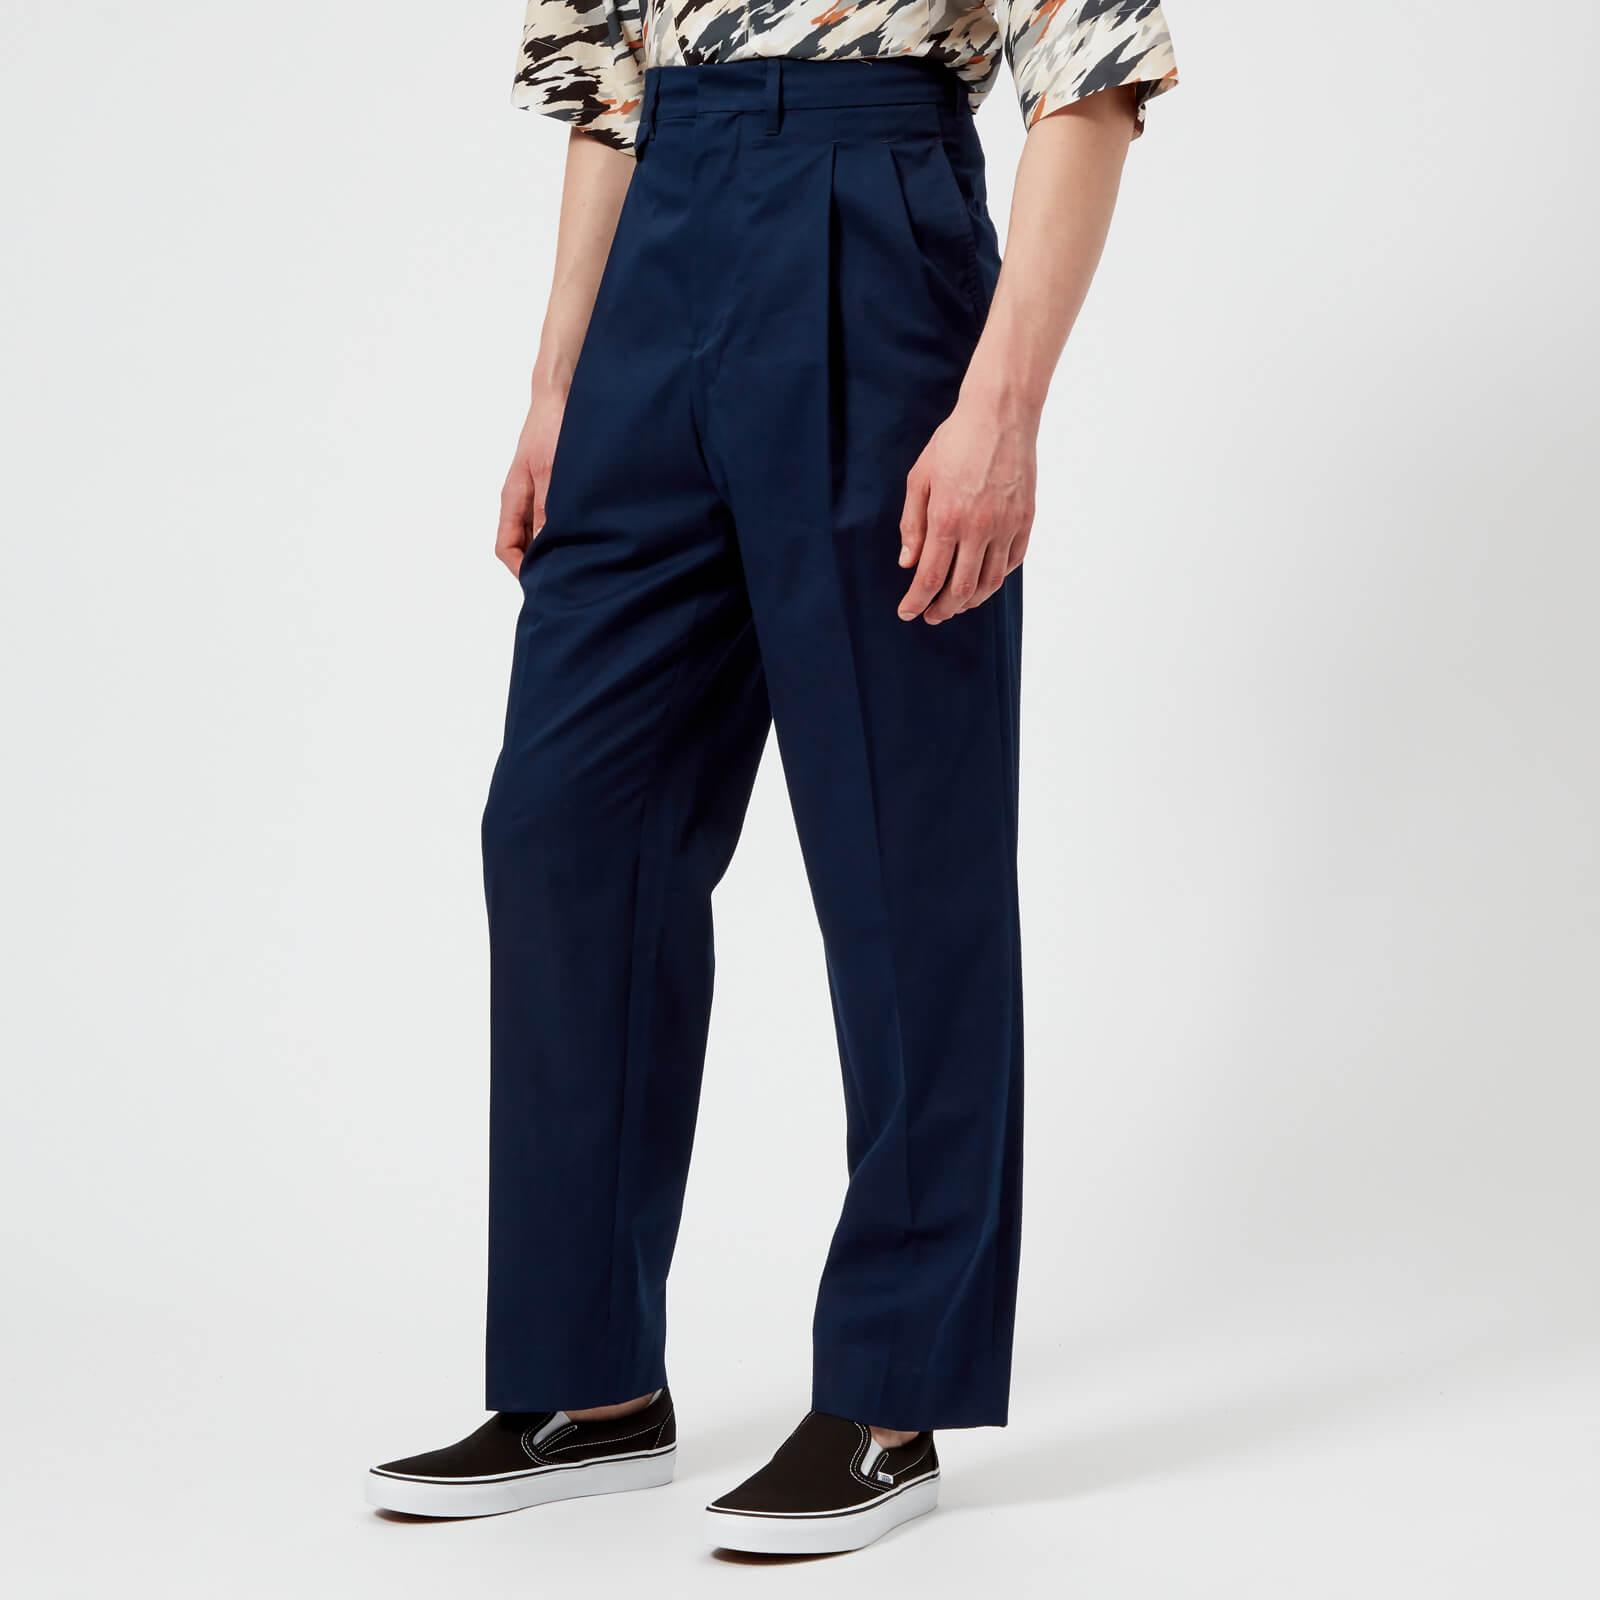 Lemaire Cotton Two Pleated Trousers in Blue for Men - Lyst